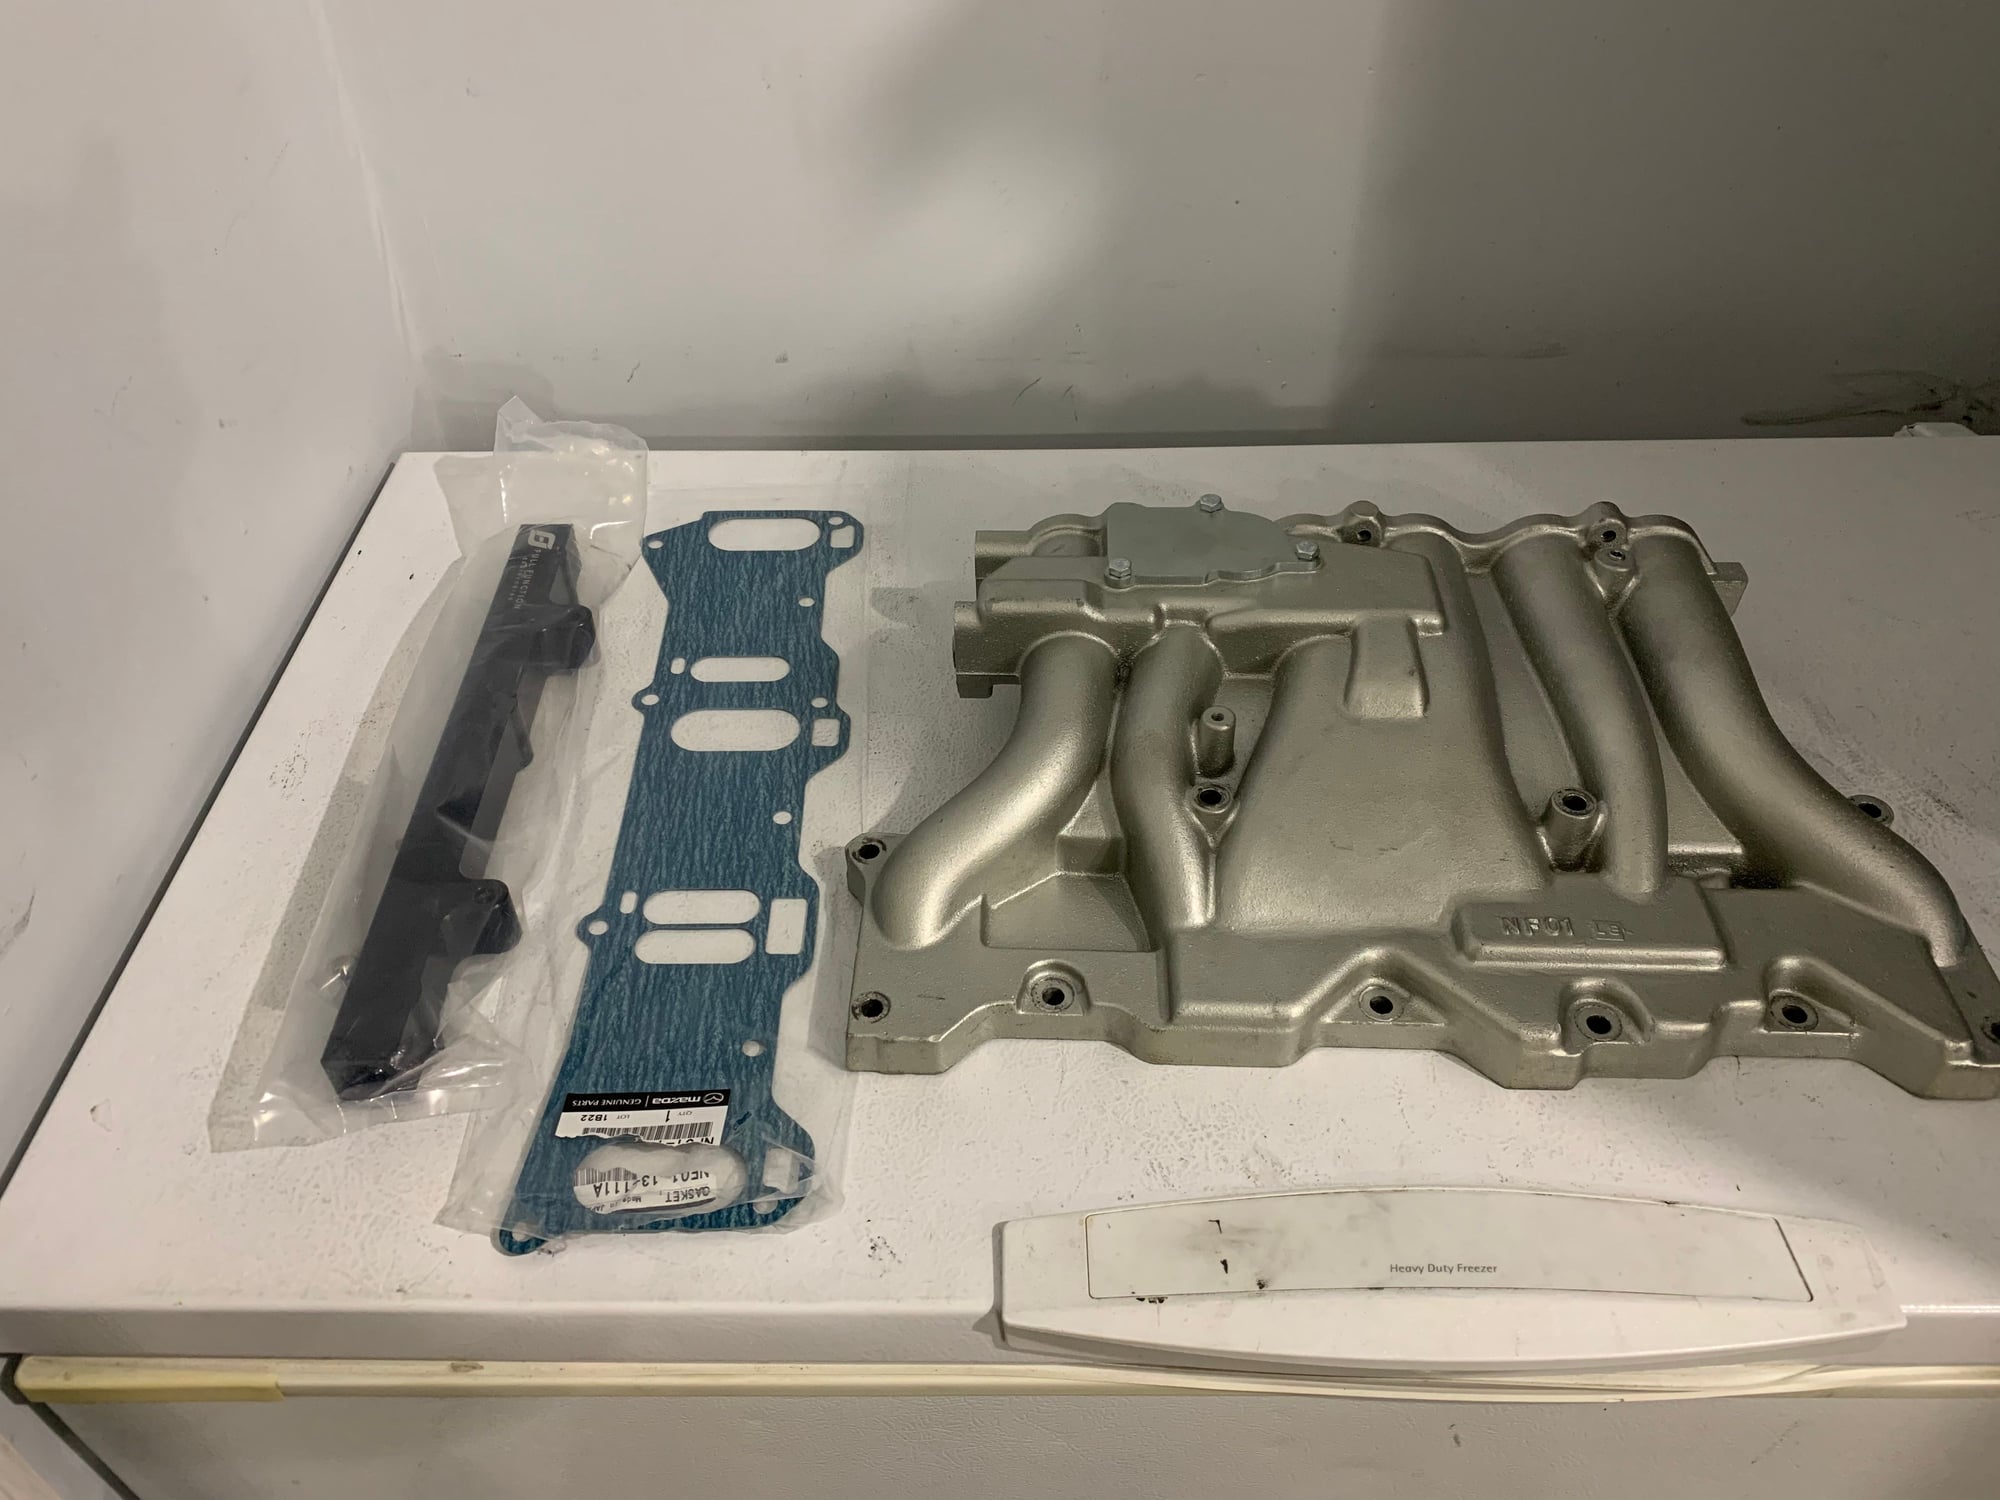 Engine - Intake/Fuel - 20B Lower Intake Parts - Gasket, FFE Rail, Stock LIM - Used - 1993 to 2002 Mazda RX-7 - Allentown, PA 18031, United States